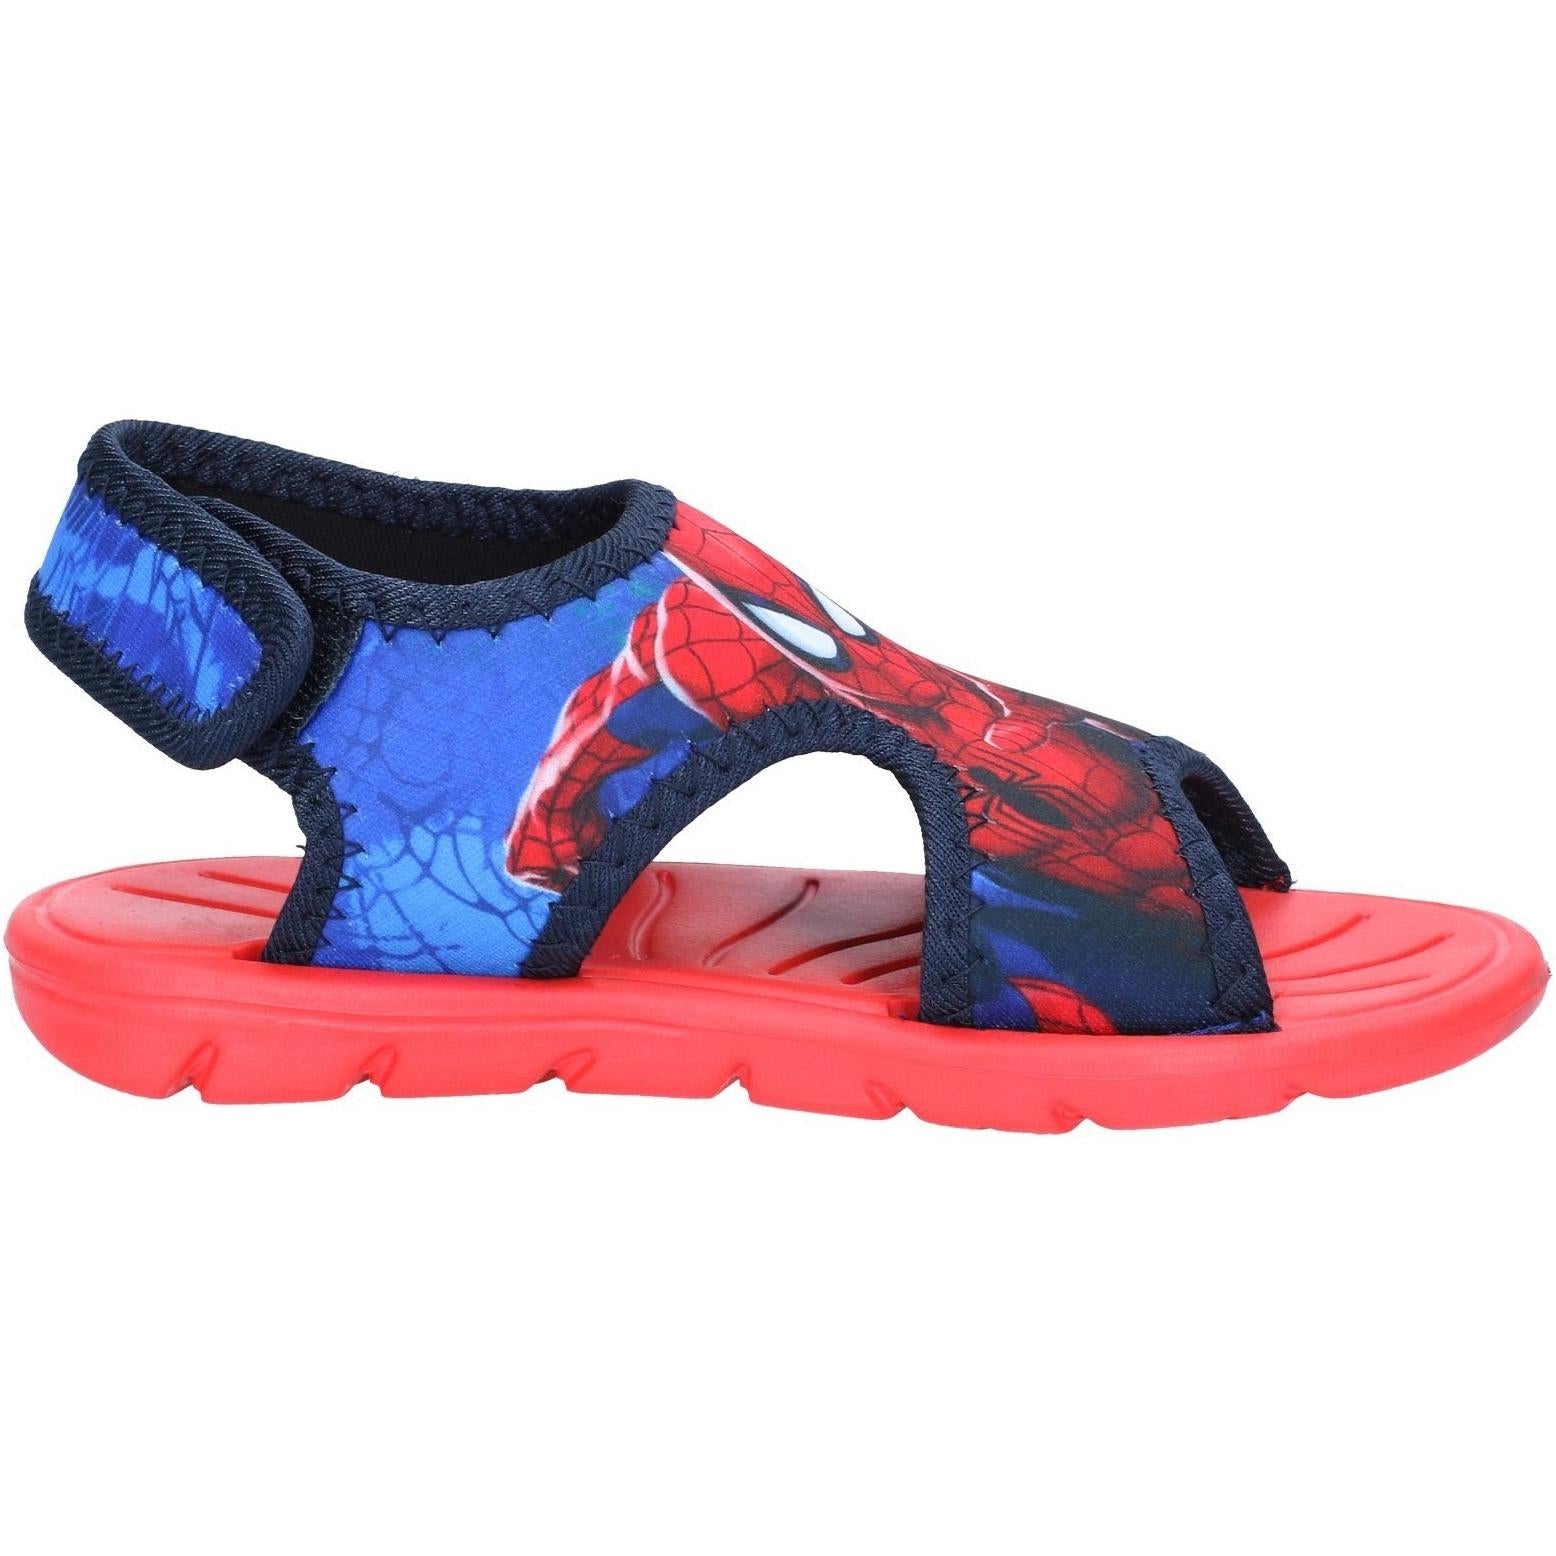 Leomil Spiderman Classic Sandals touch fastening shoe